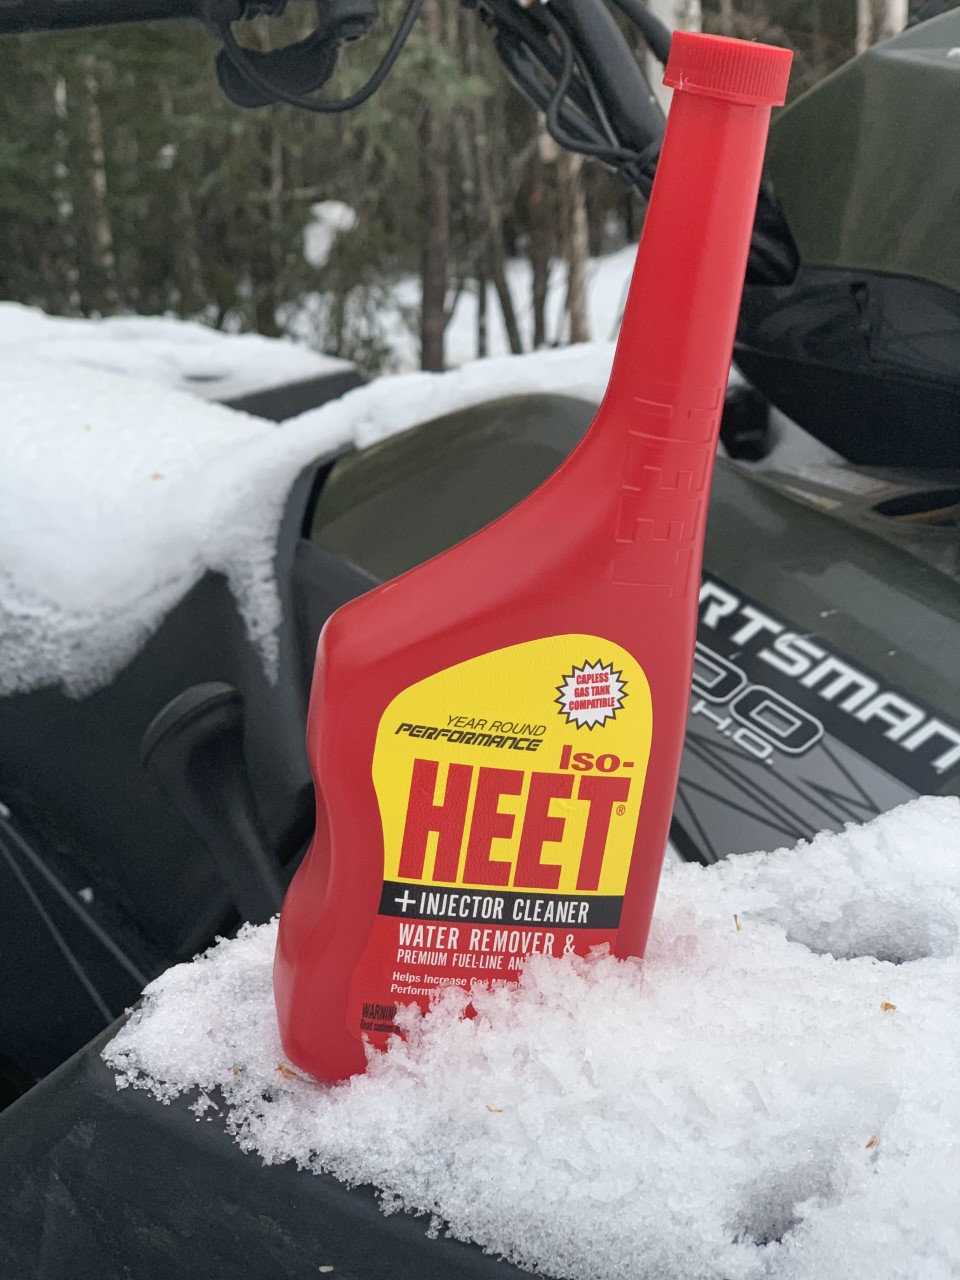 Iso-HEET will keep moisture out of your fuel tank, preventing breakdowns.